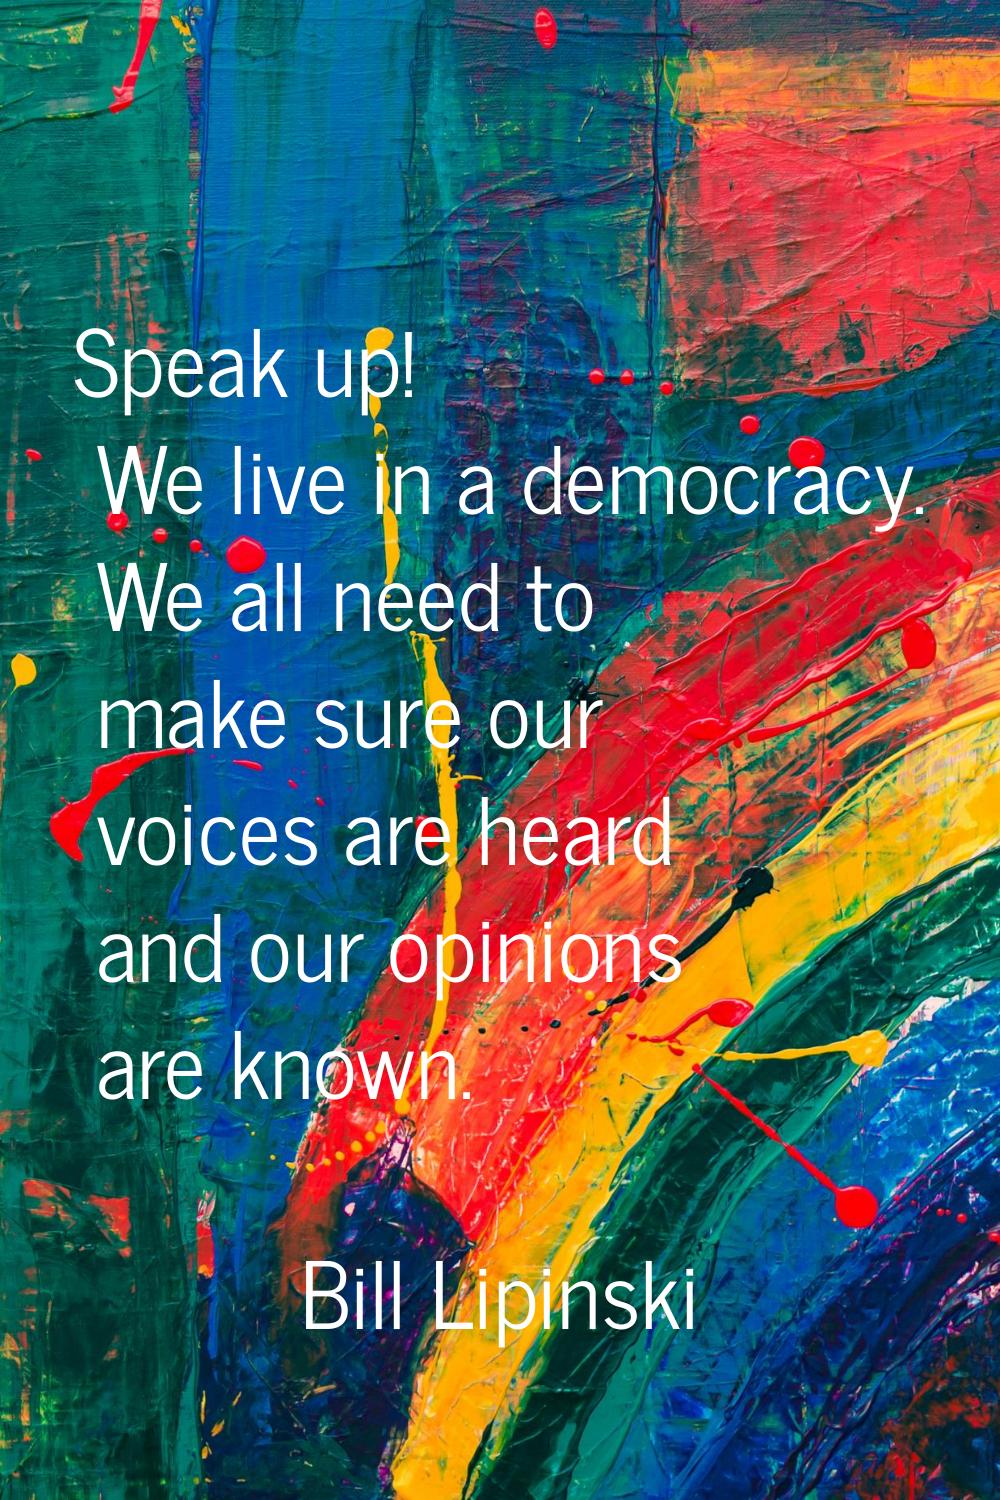 Speak up! We live in a democracy. We all need to make sure our voices are heard and our opinions ar